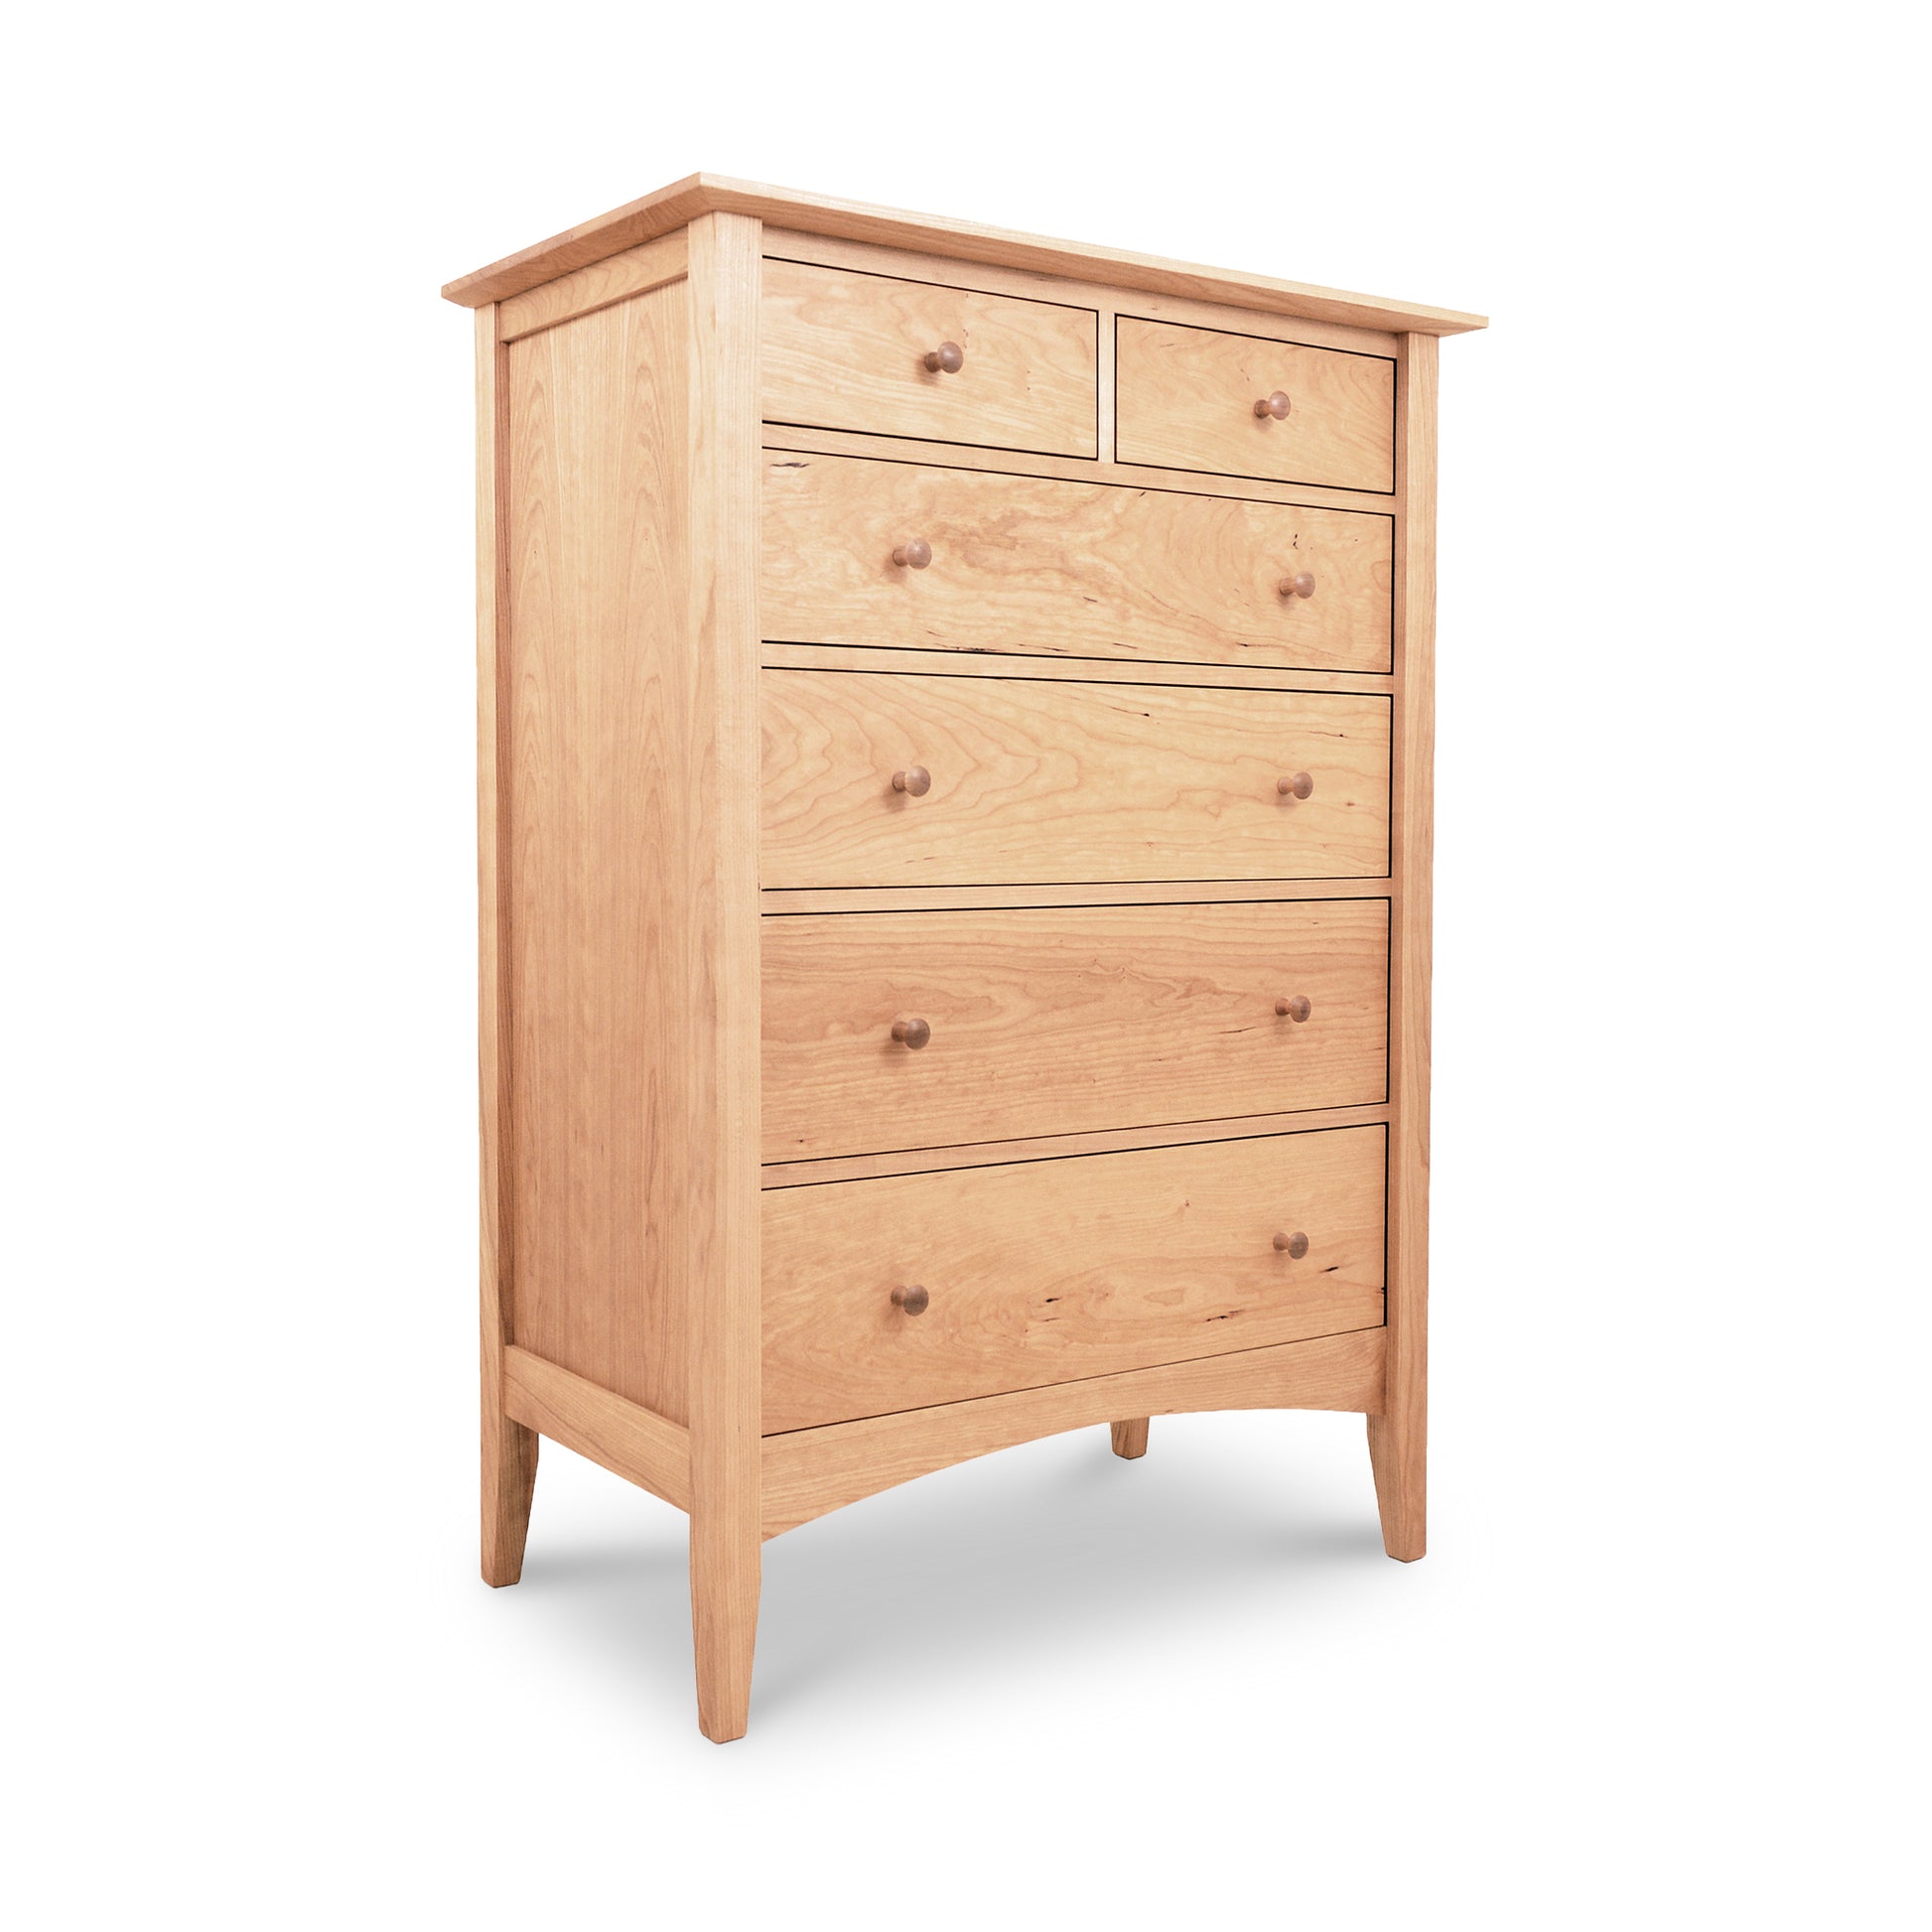 A sustainably-harvested, natural American Shaker 6-Drawer Chest by Maple Corner Woodworks on a white background.